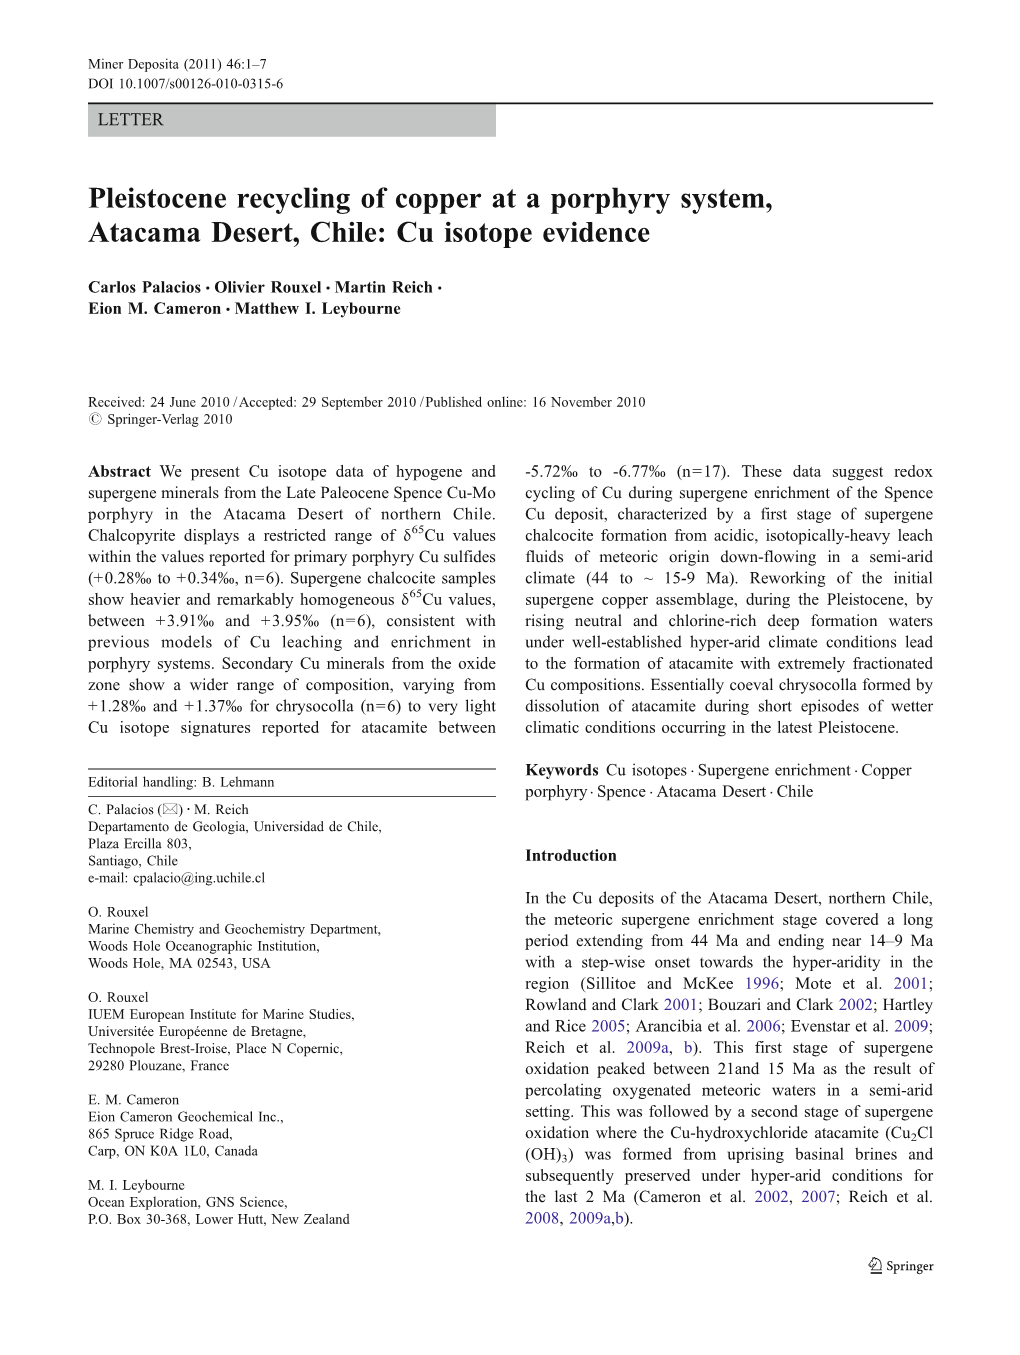 Pleistocene Recycling of Copper at a Porphyry System, Atacama Desert, Chile: Cu Isotope Evidence